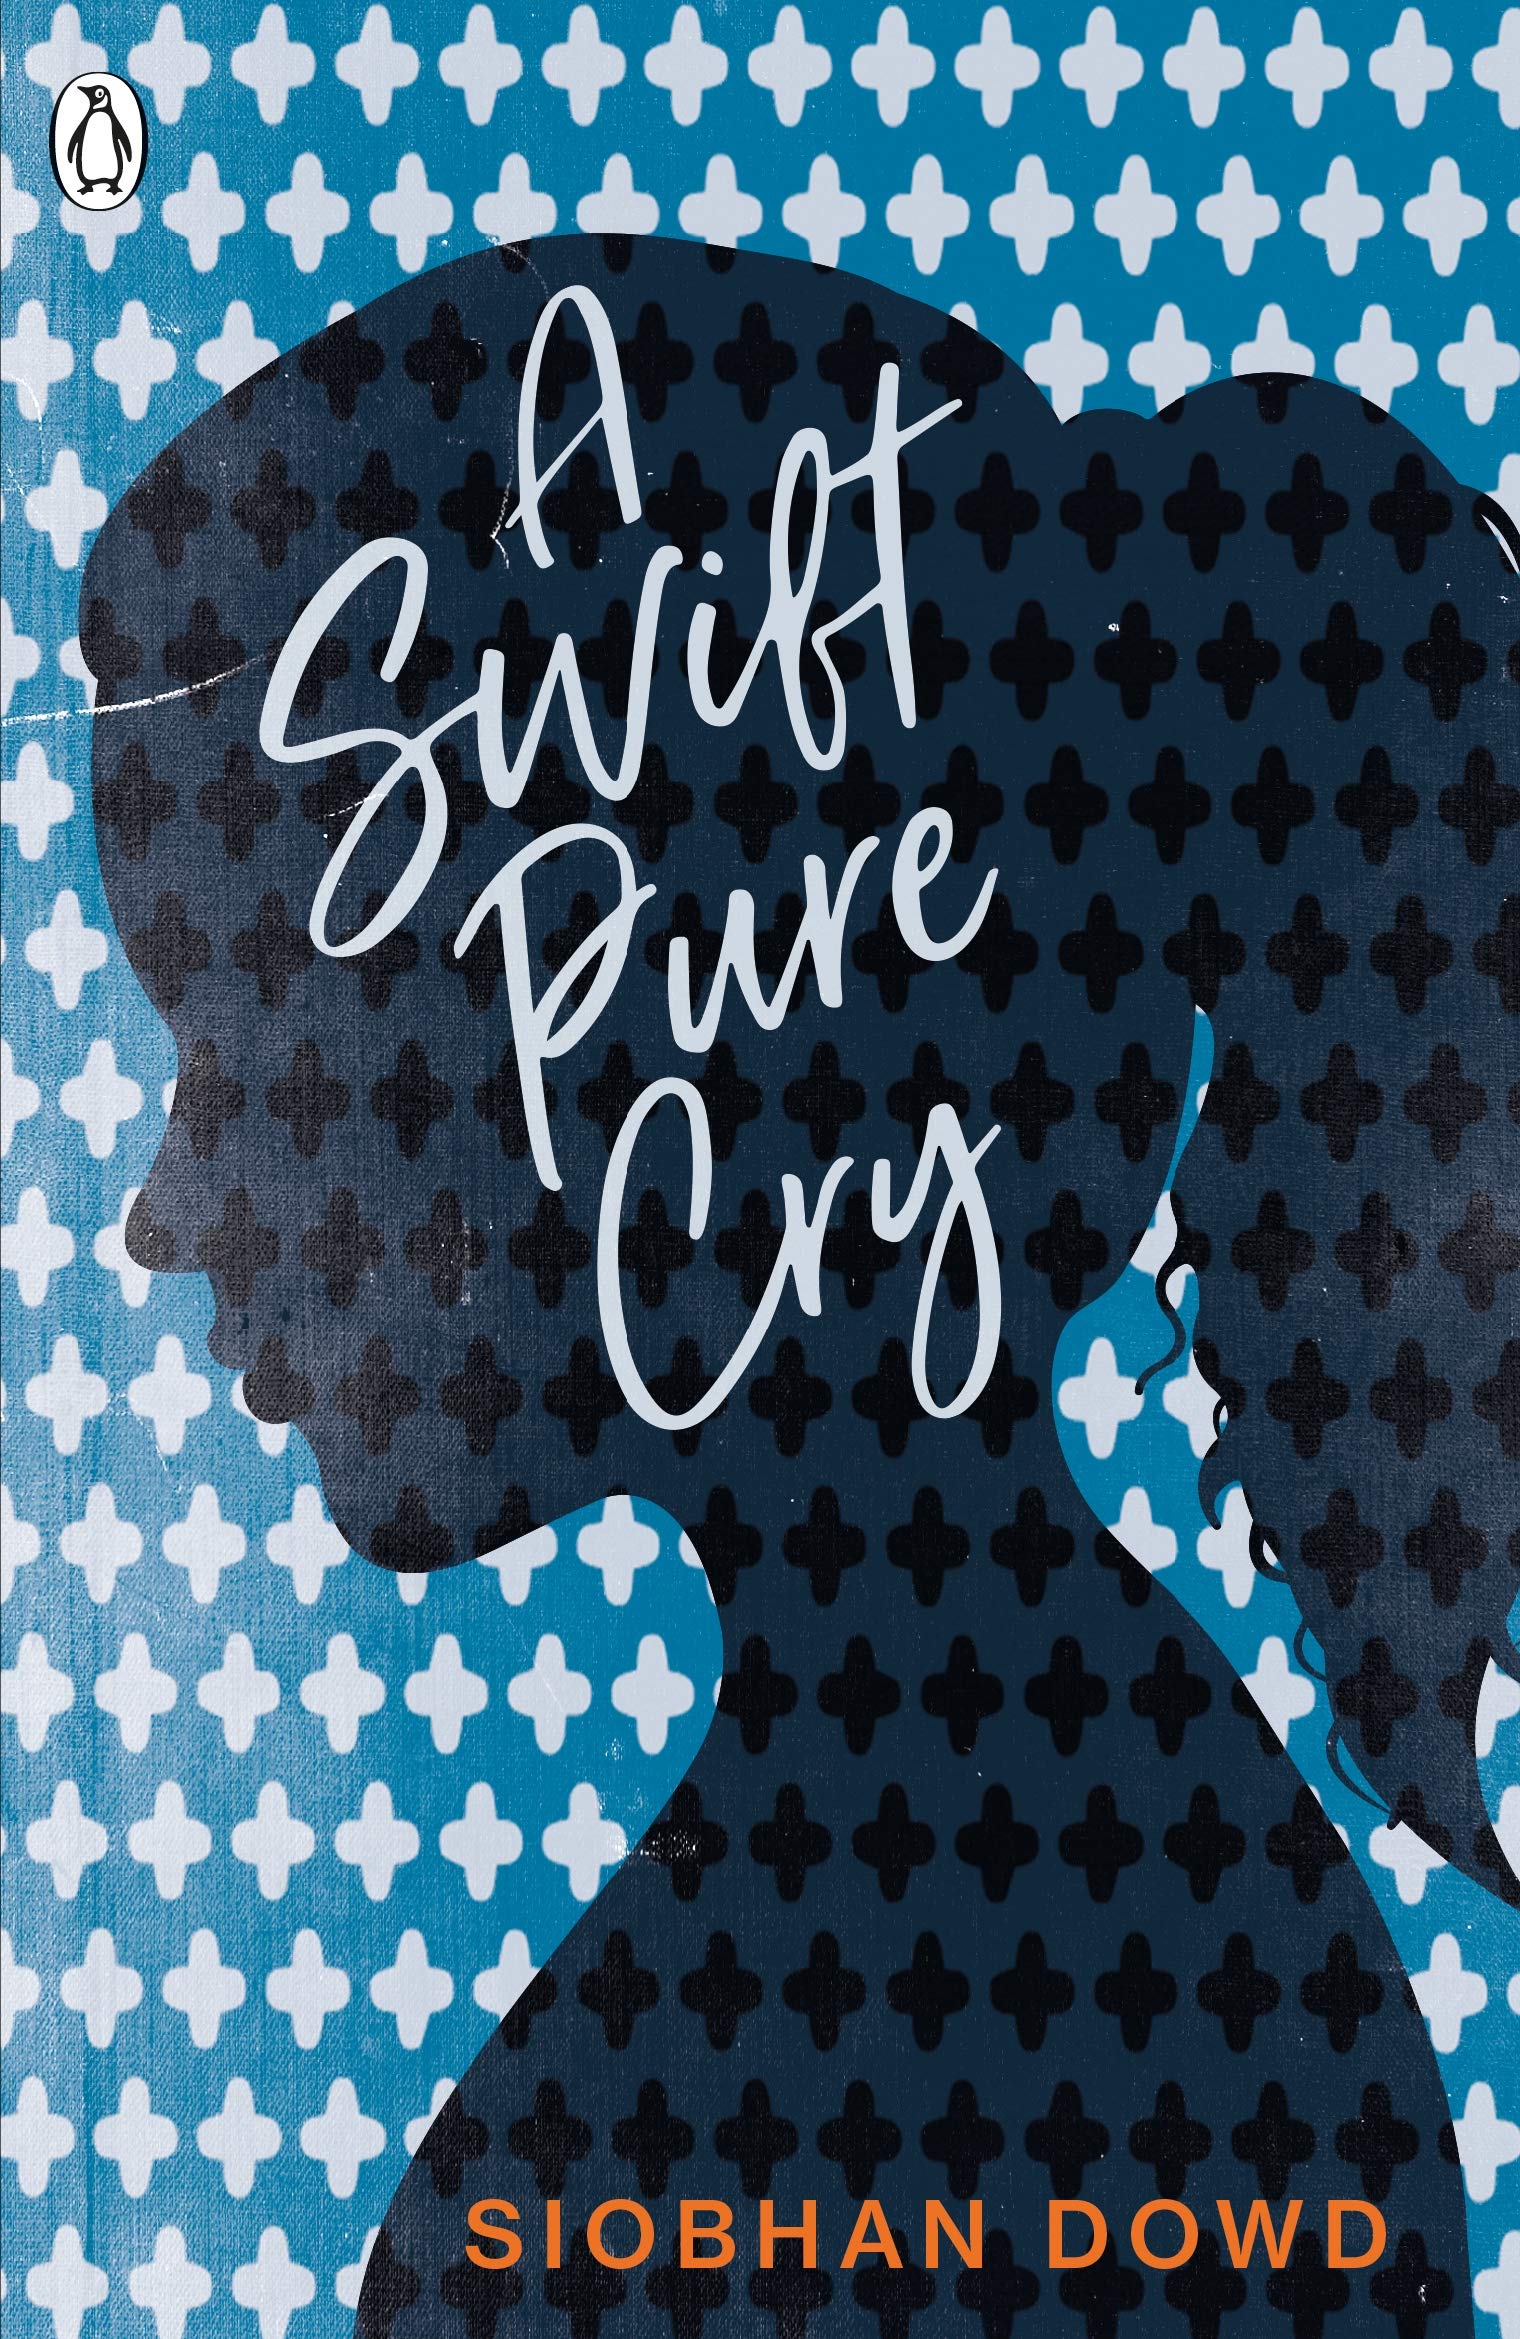 A Swift Pure Cry | Siobhan Dowd image8